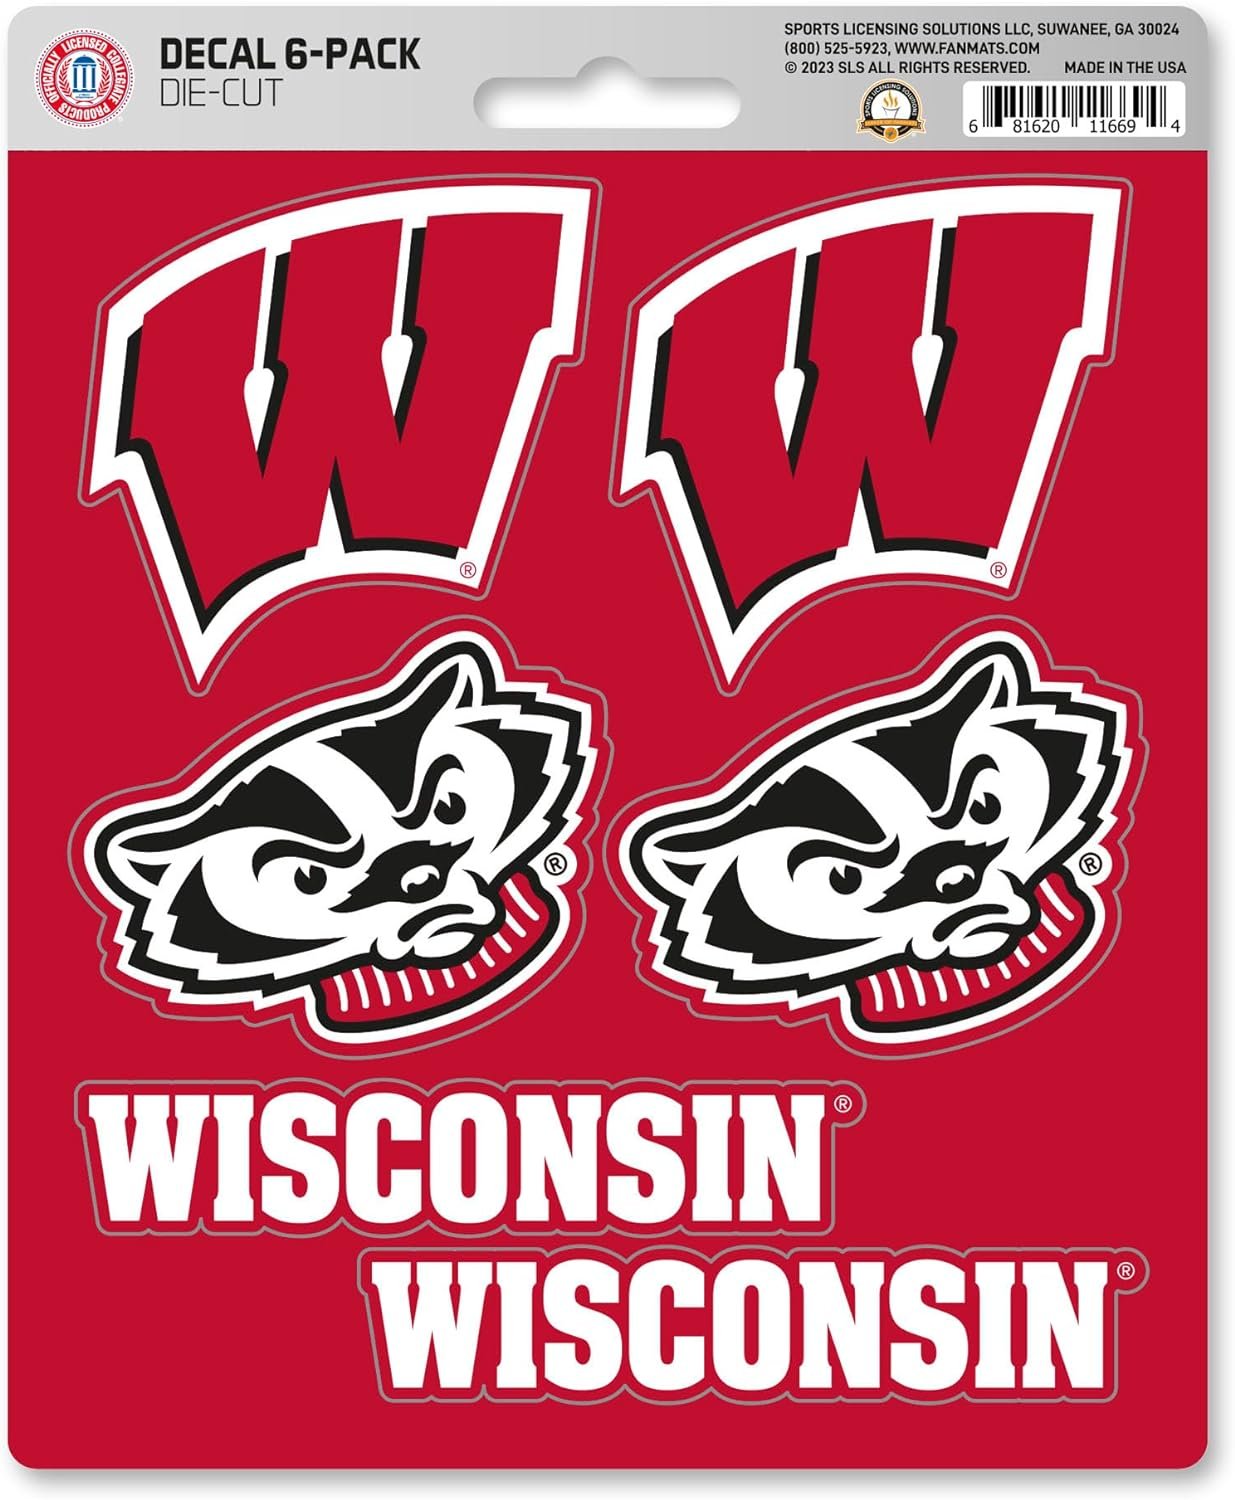 University of Wisconsin Badgers 6-Piece Decal Sticker Set, 5x6 Inch Sheet, Gift for football fans for any hard surfaces around home, automotive, personal items